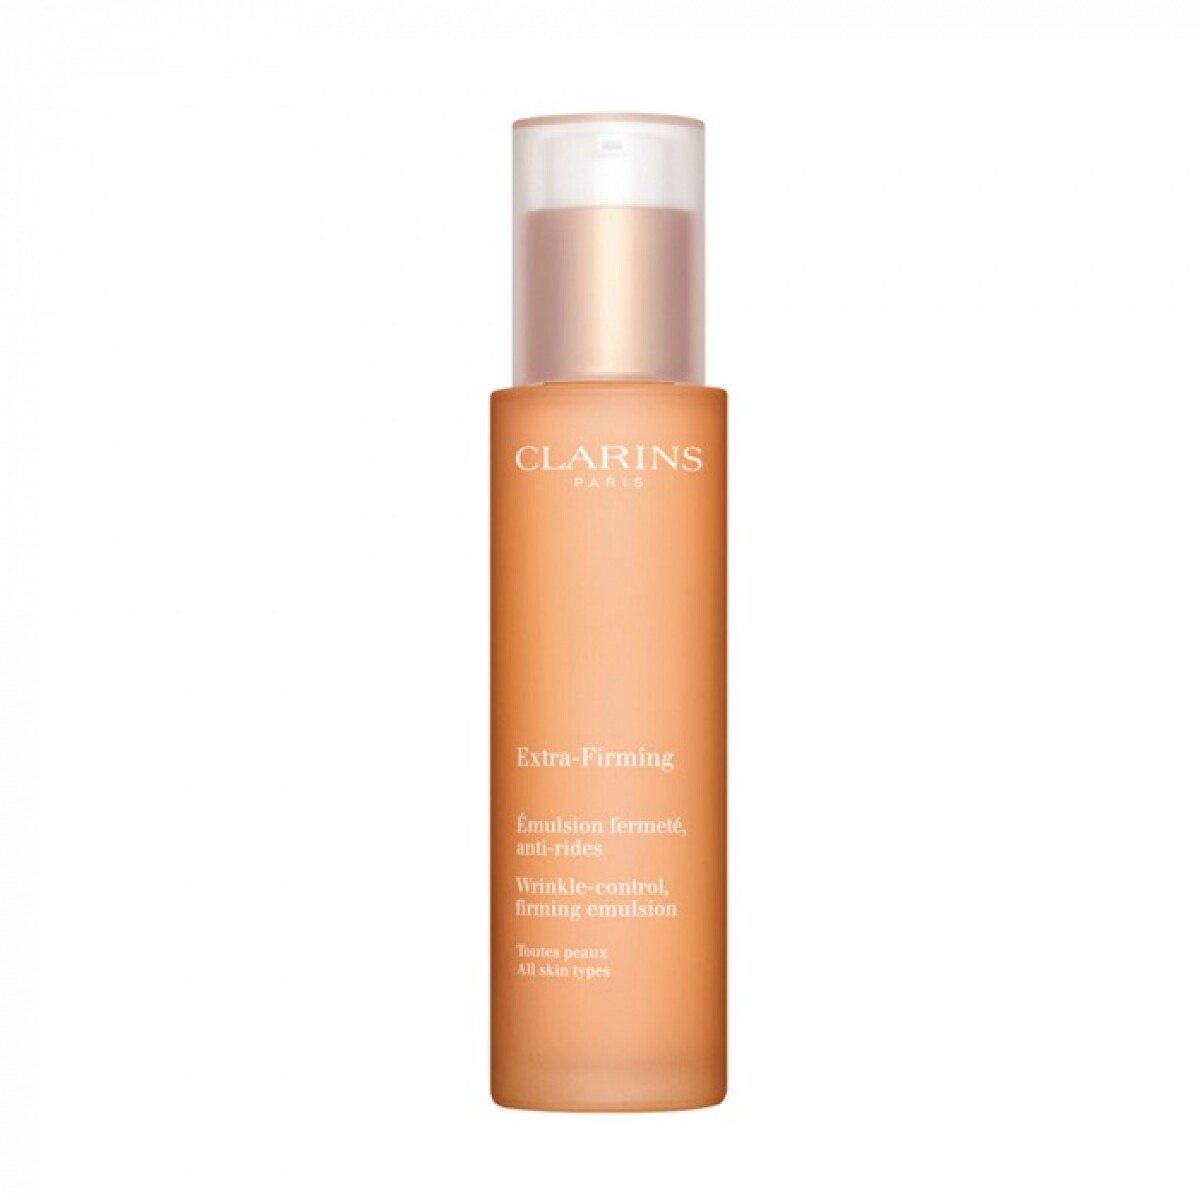 Clarins Extra-Firming Treatment Essence 